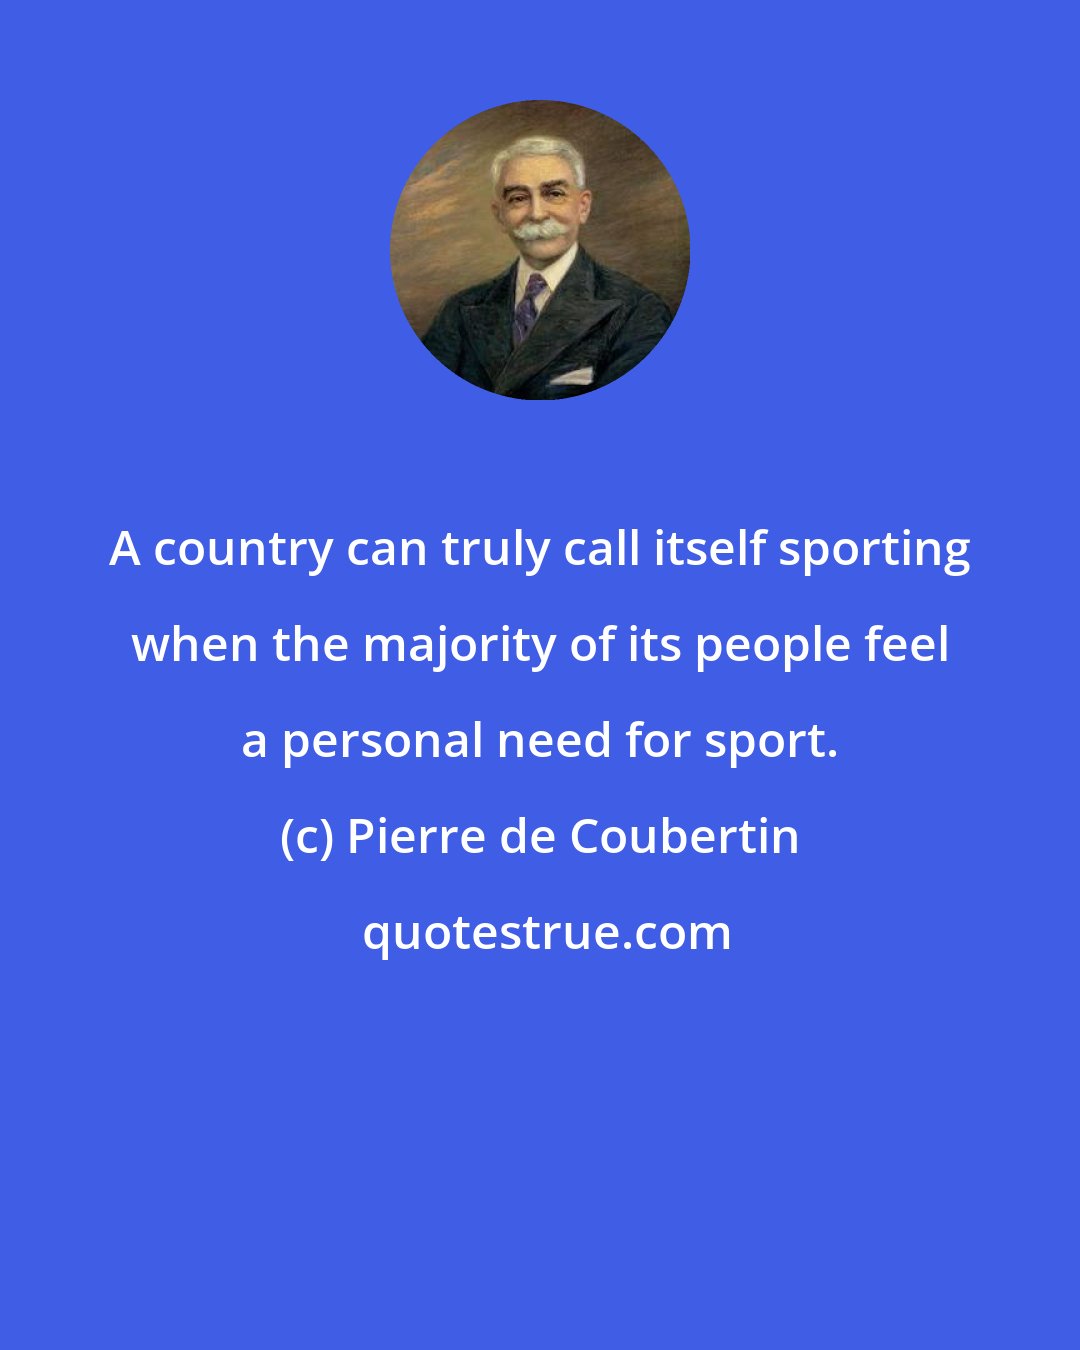 Pierre de Coubertin: A country can truly call itself sporting when the majority of its people feel a personal need for sport.